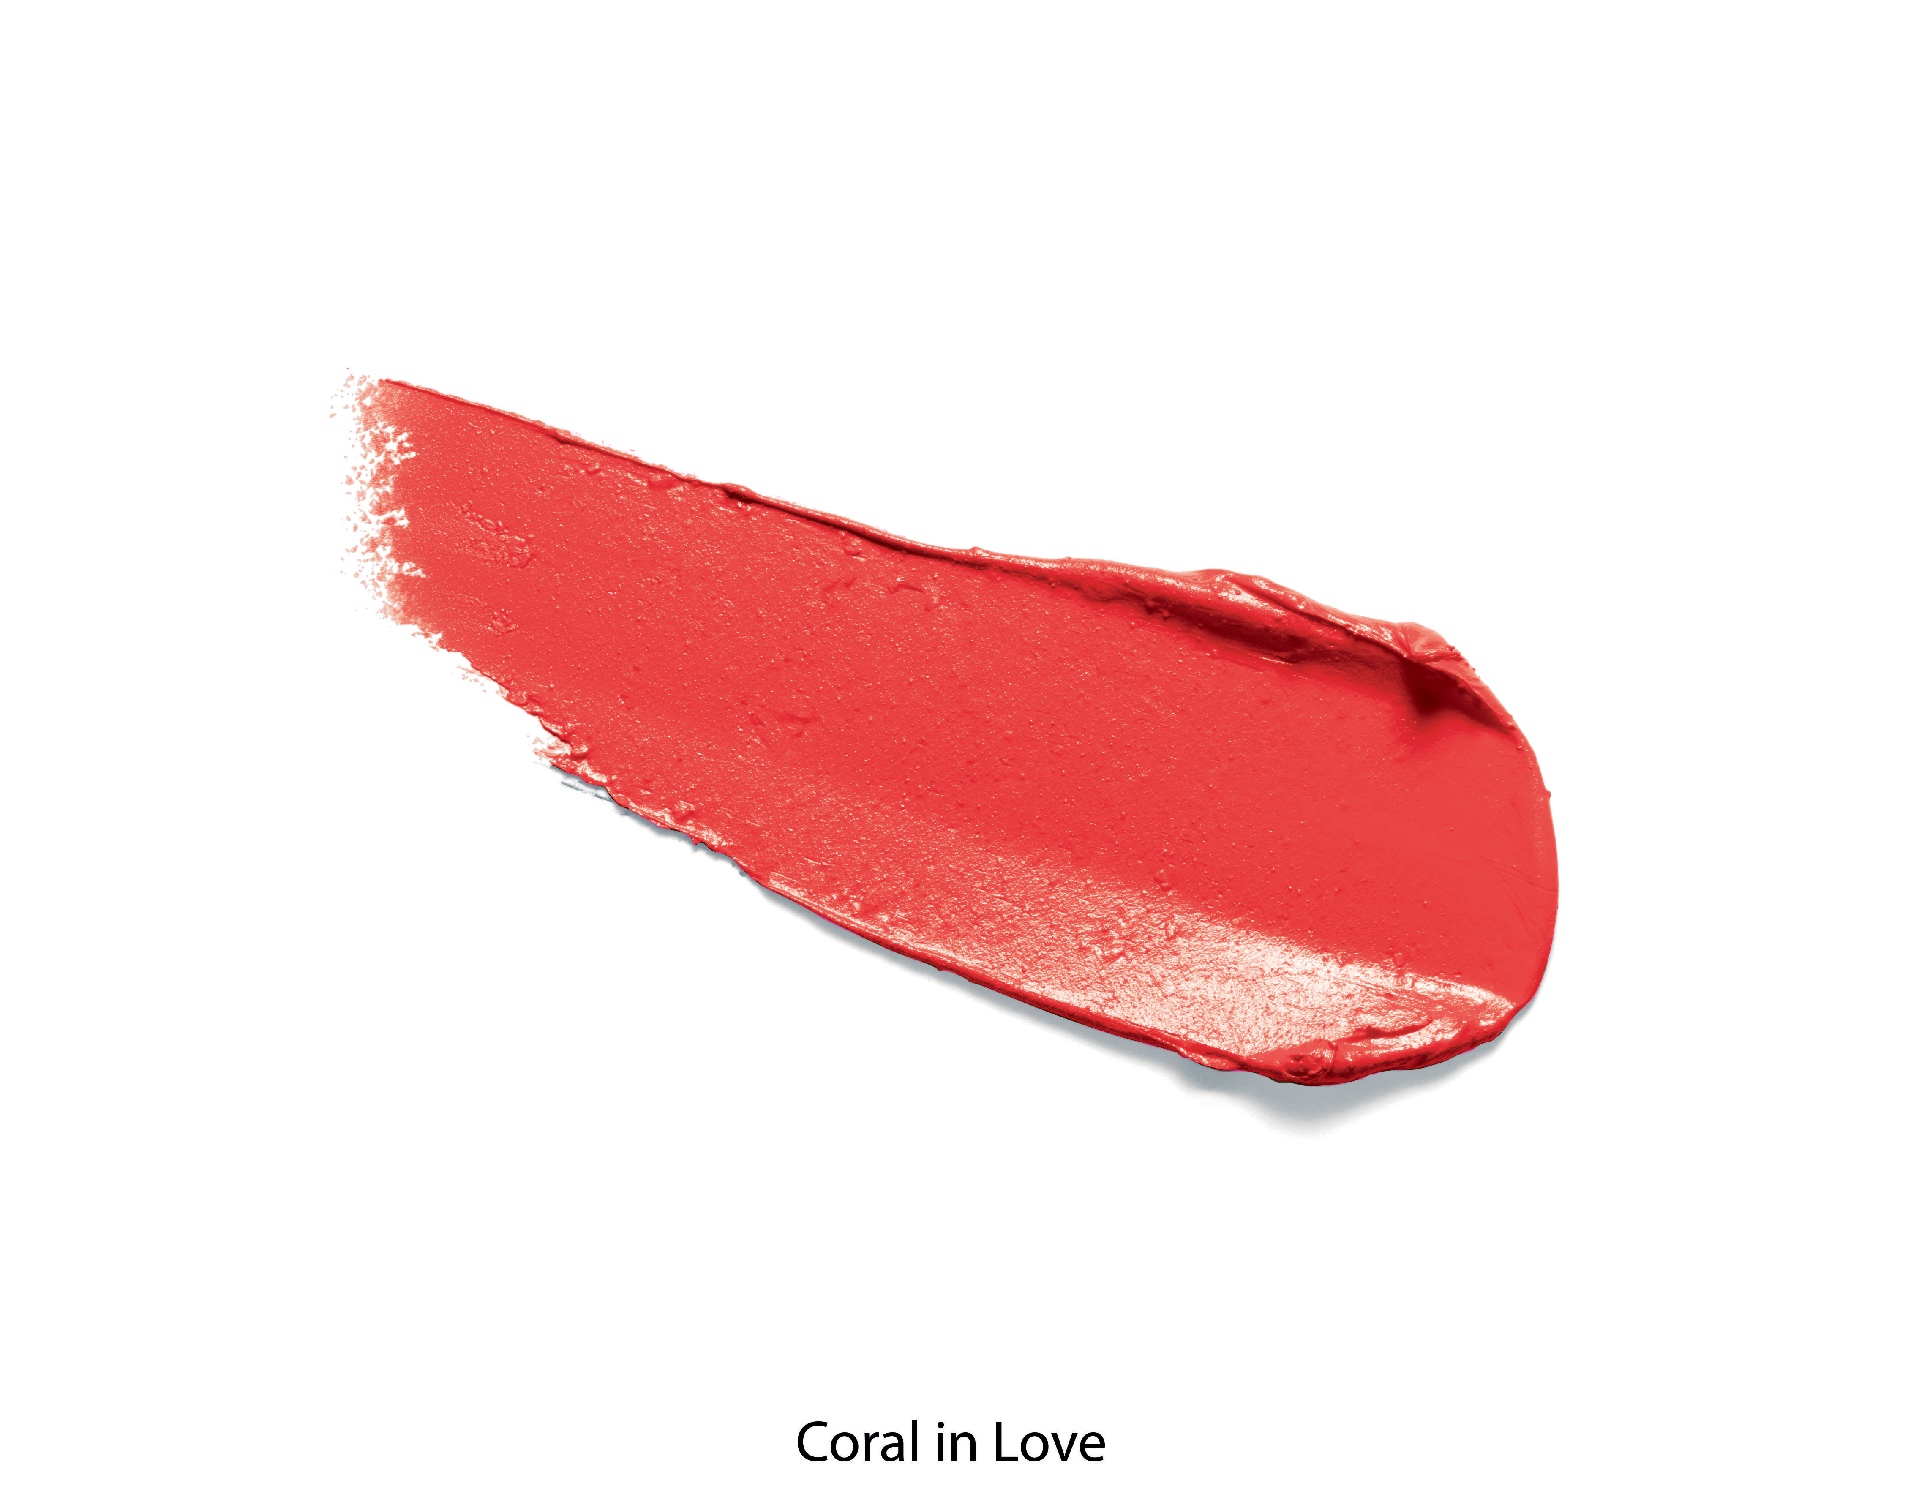 color_trend_ajakruzs_coral_in_love_529_ft_6305_7_3.jpg